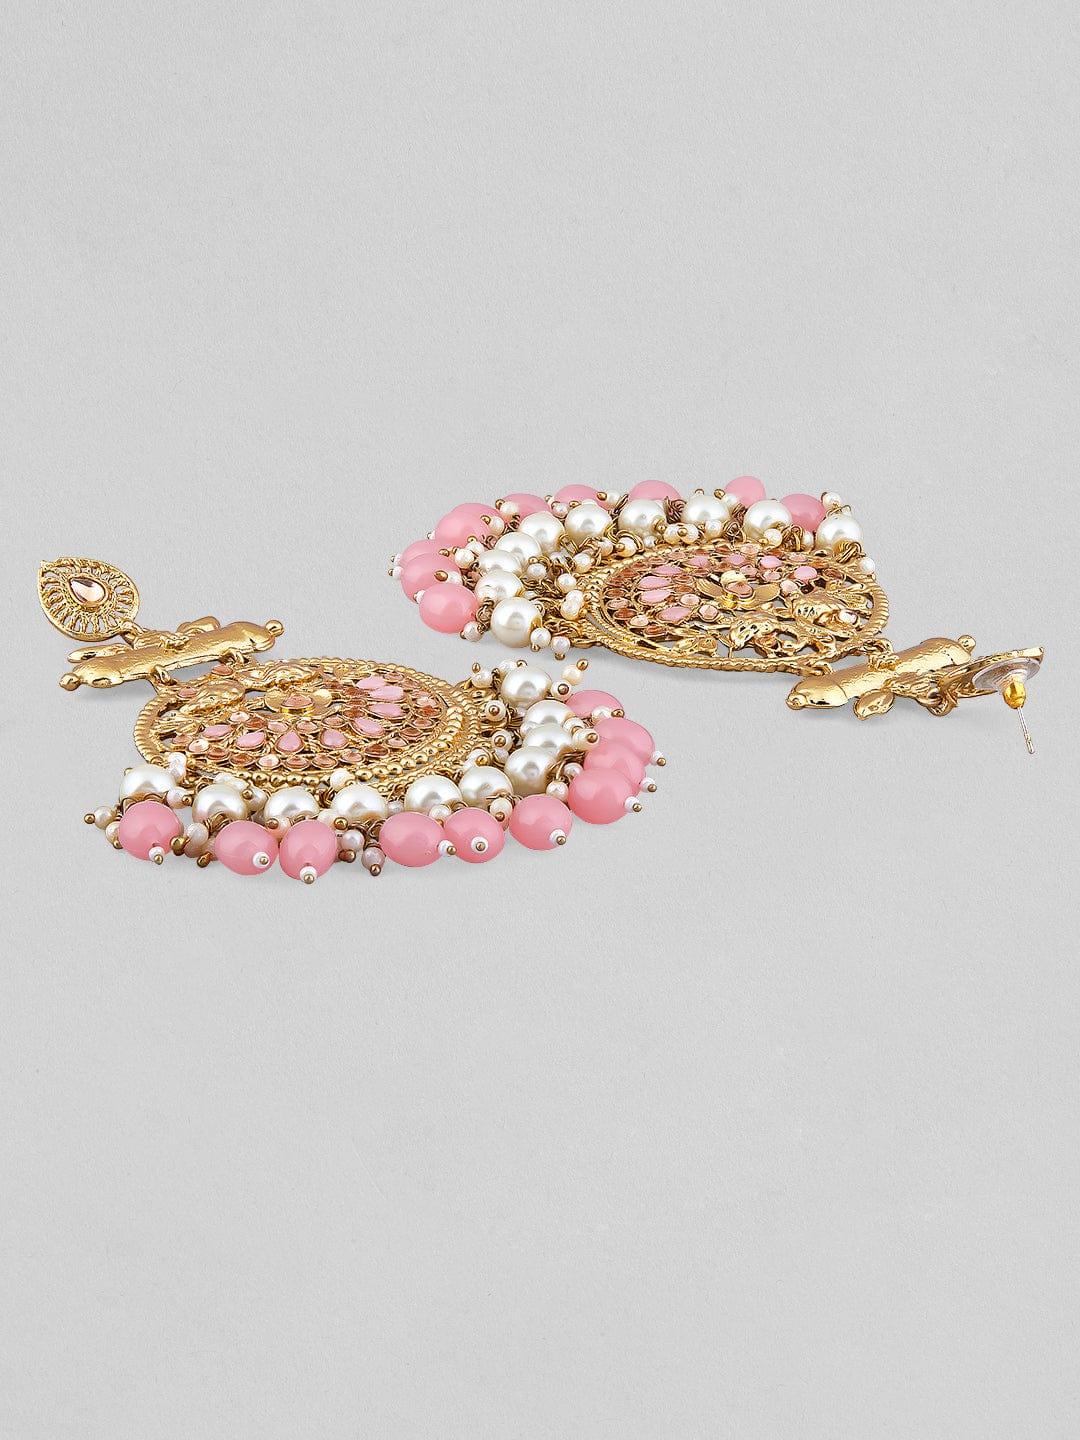 Rubans 22K Gold Plated Chandbali Earrings With Beautiful Beads And Pearls - Indiakreations